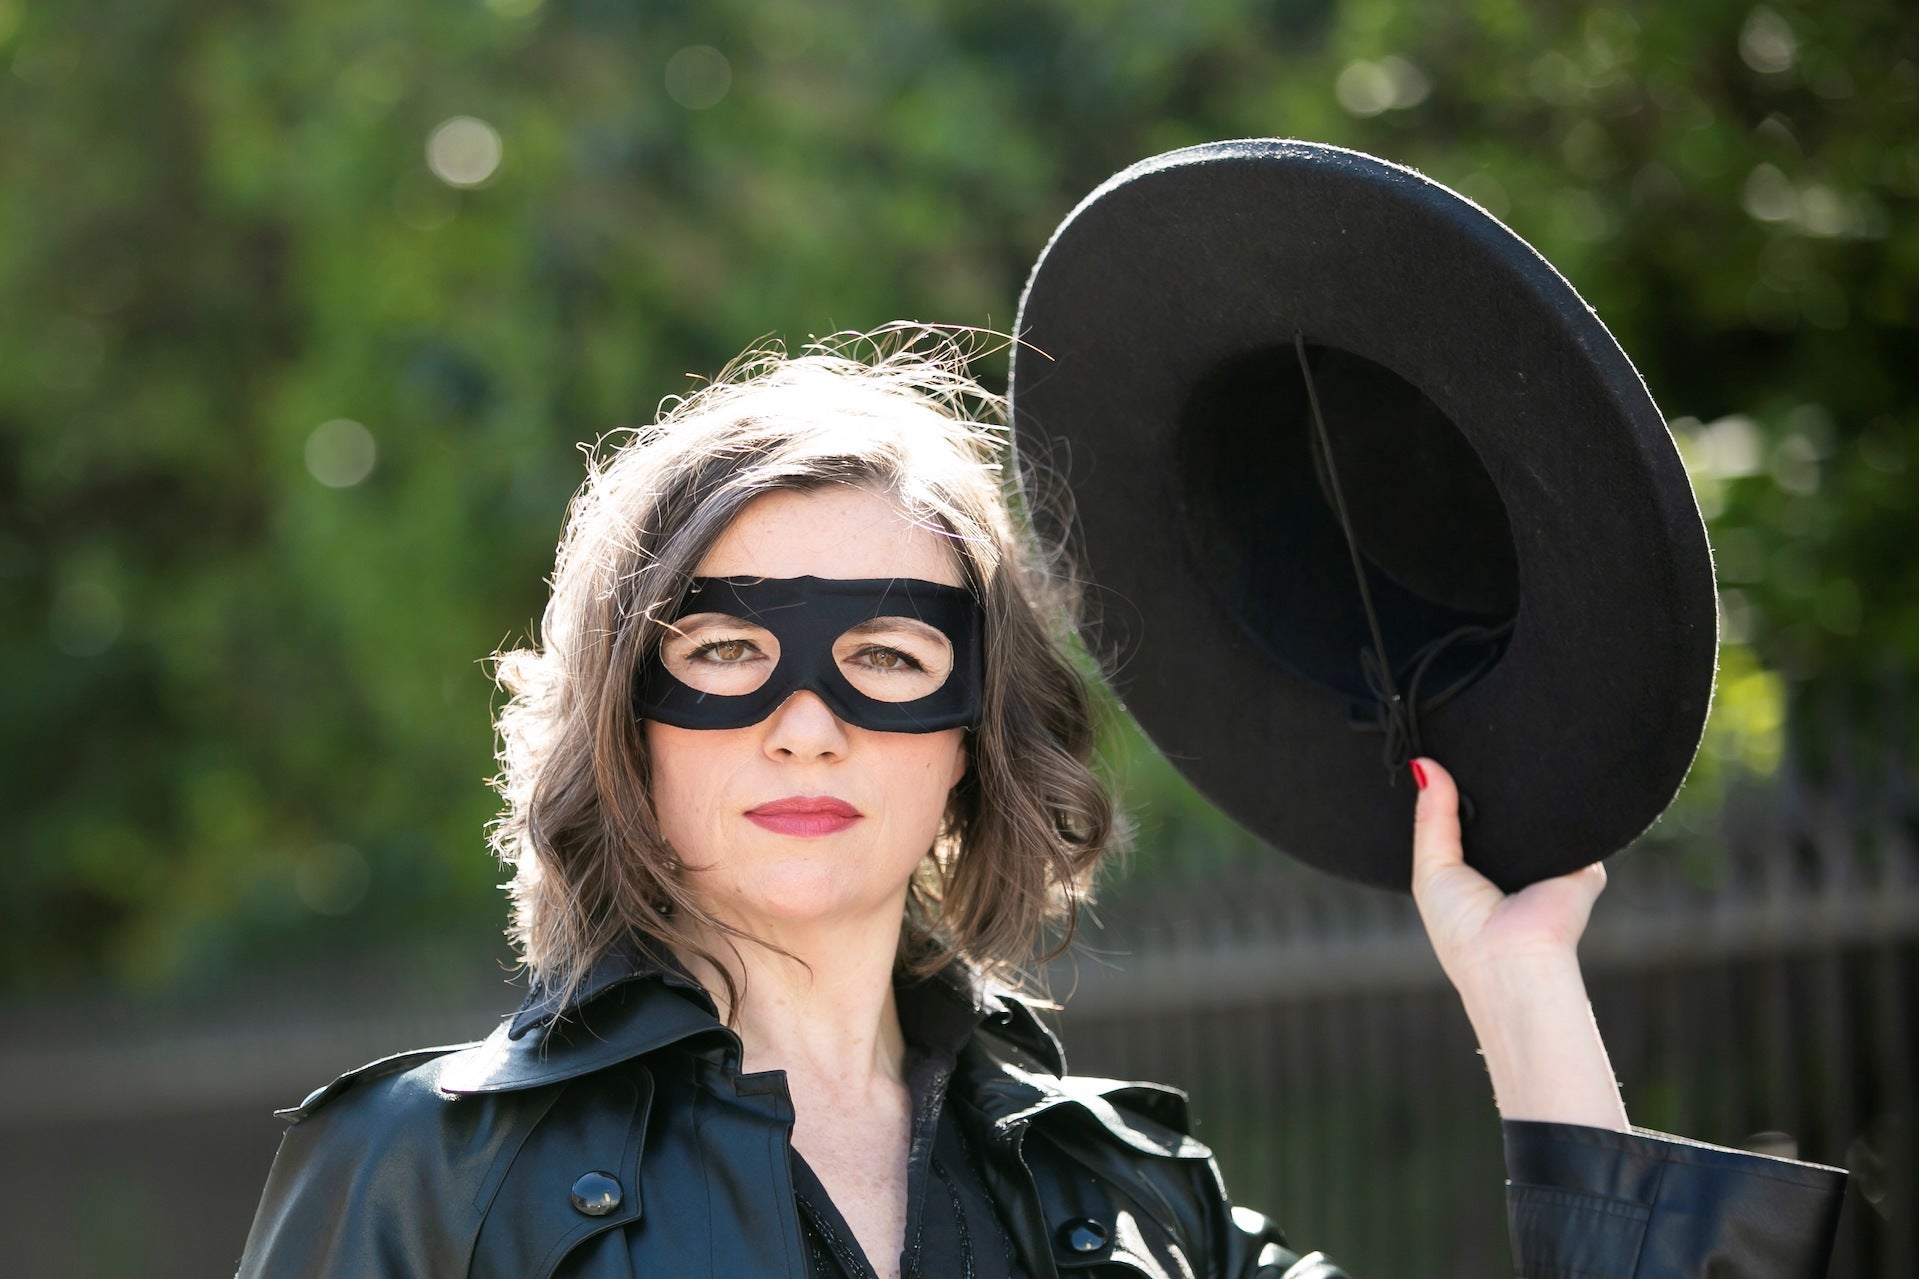 A woman outdoors dressed in black with black eye mask on, holding up a black hat in her left hand.